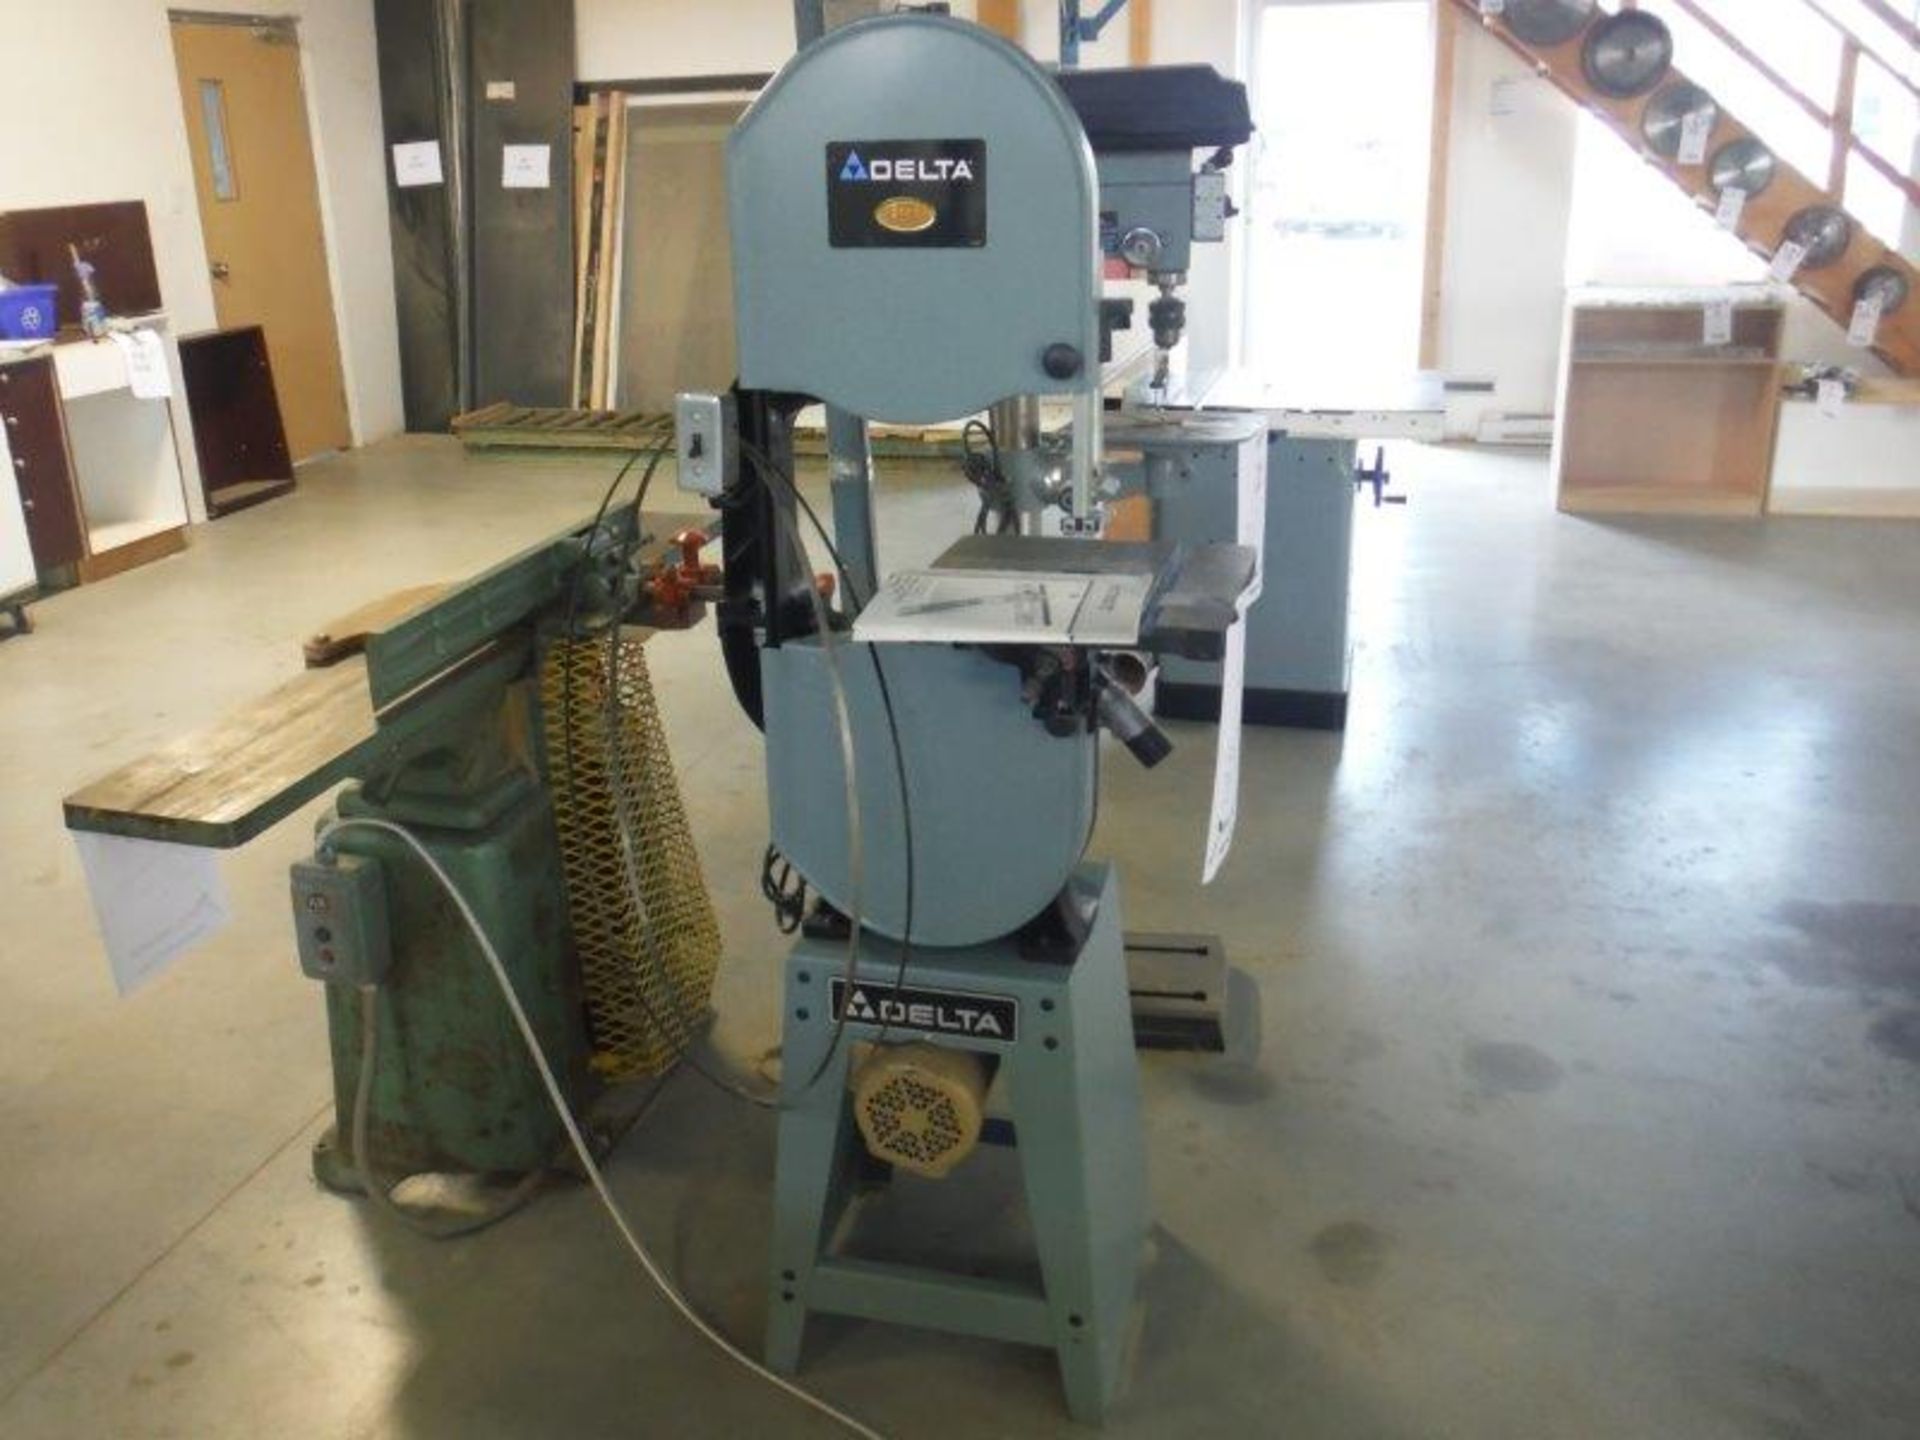 "DELTA" 14" PROFESSIONAL BAND SAW, MODEL 28-274C - Image 2 of 2